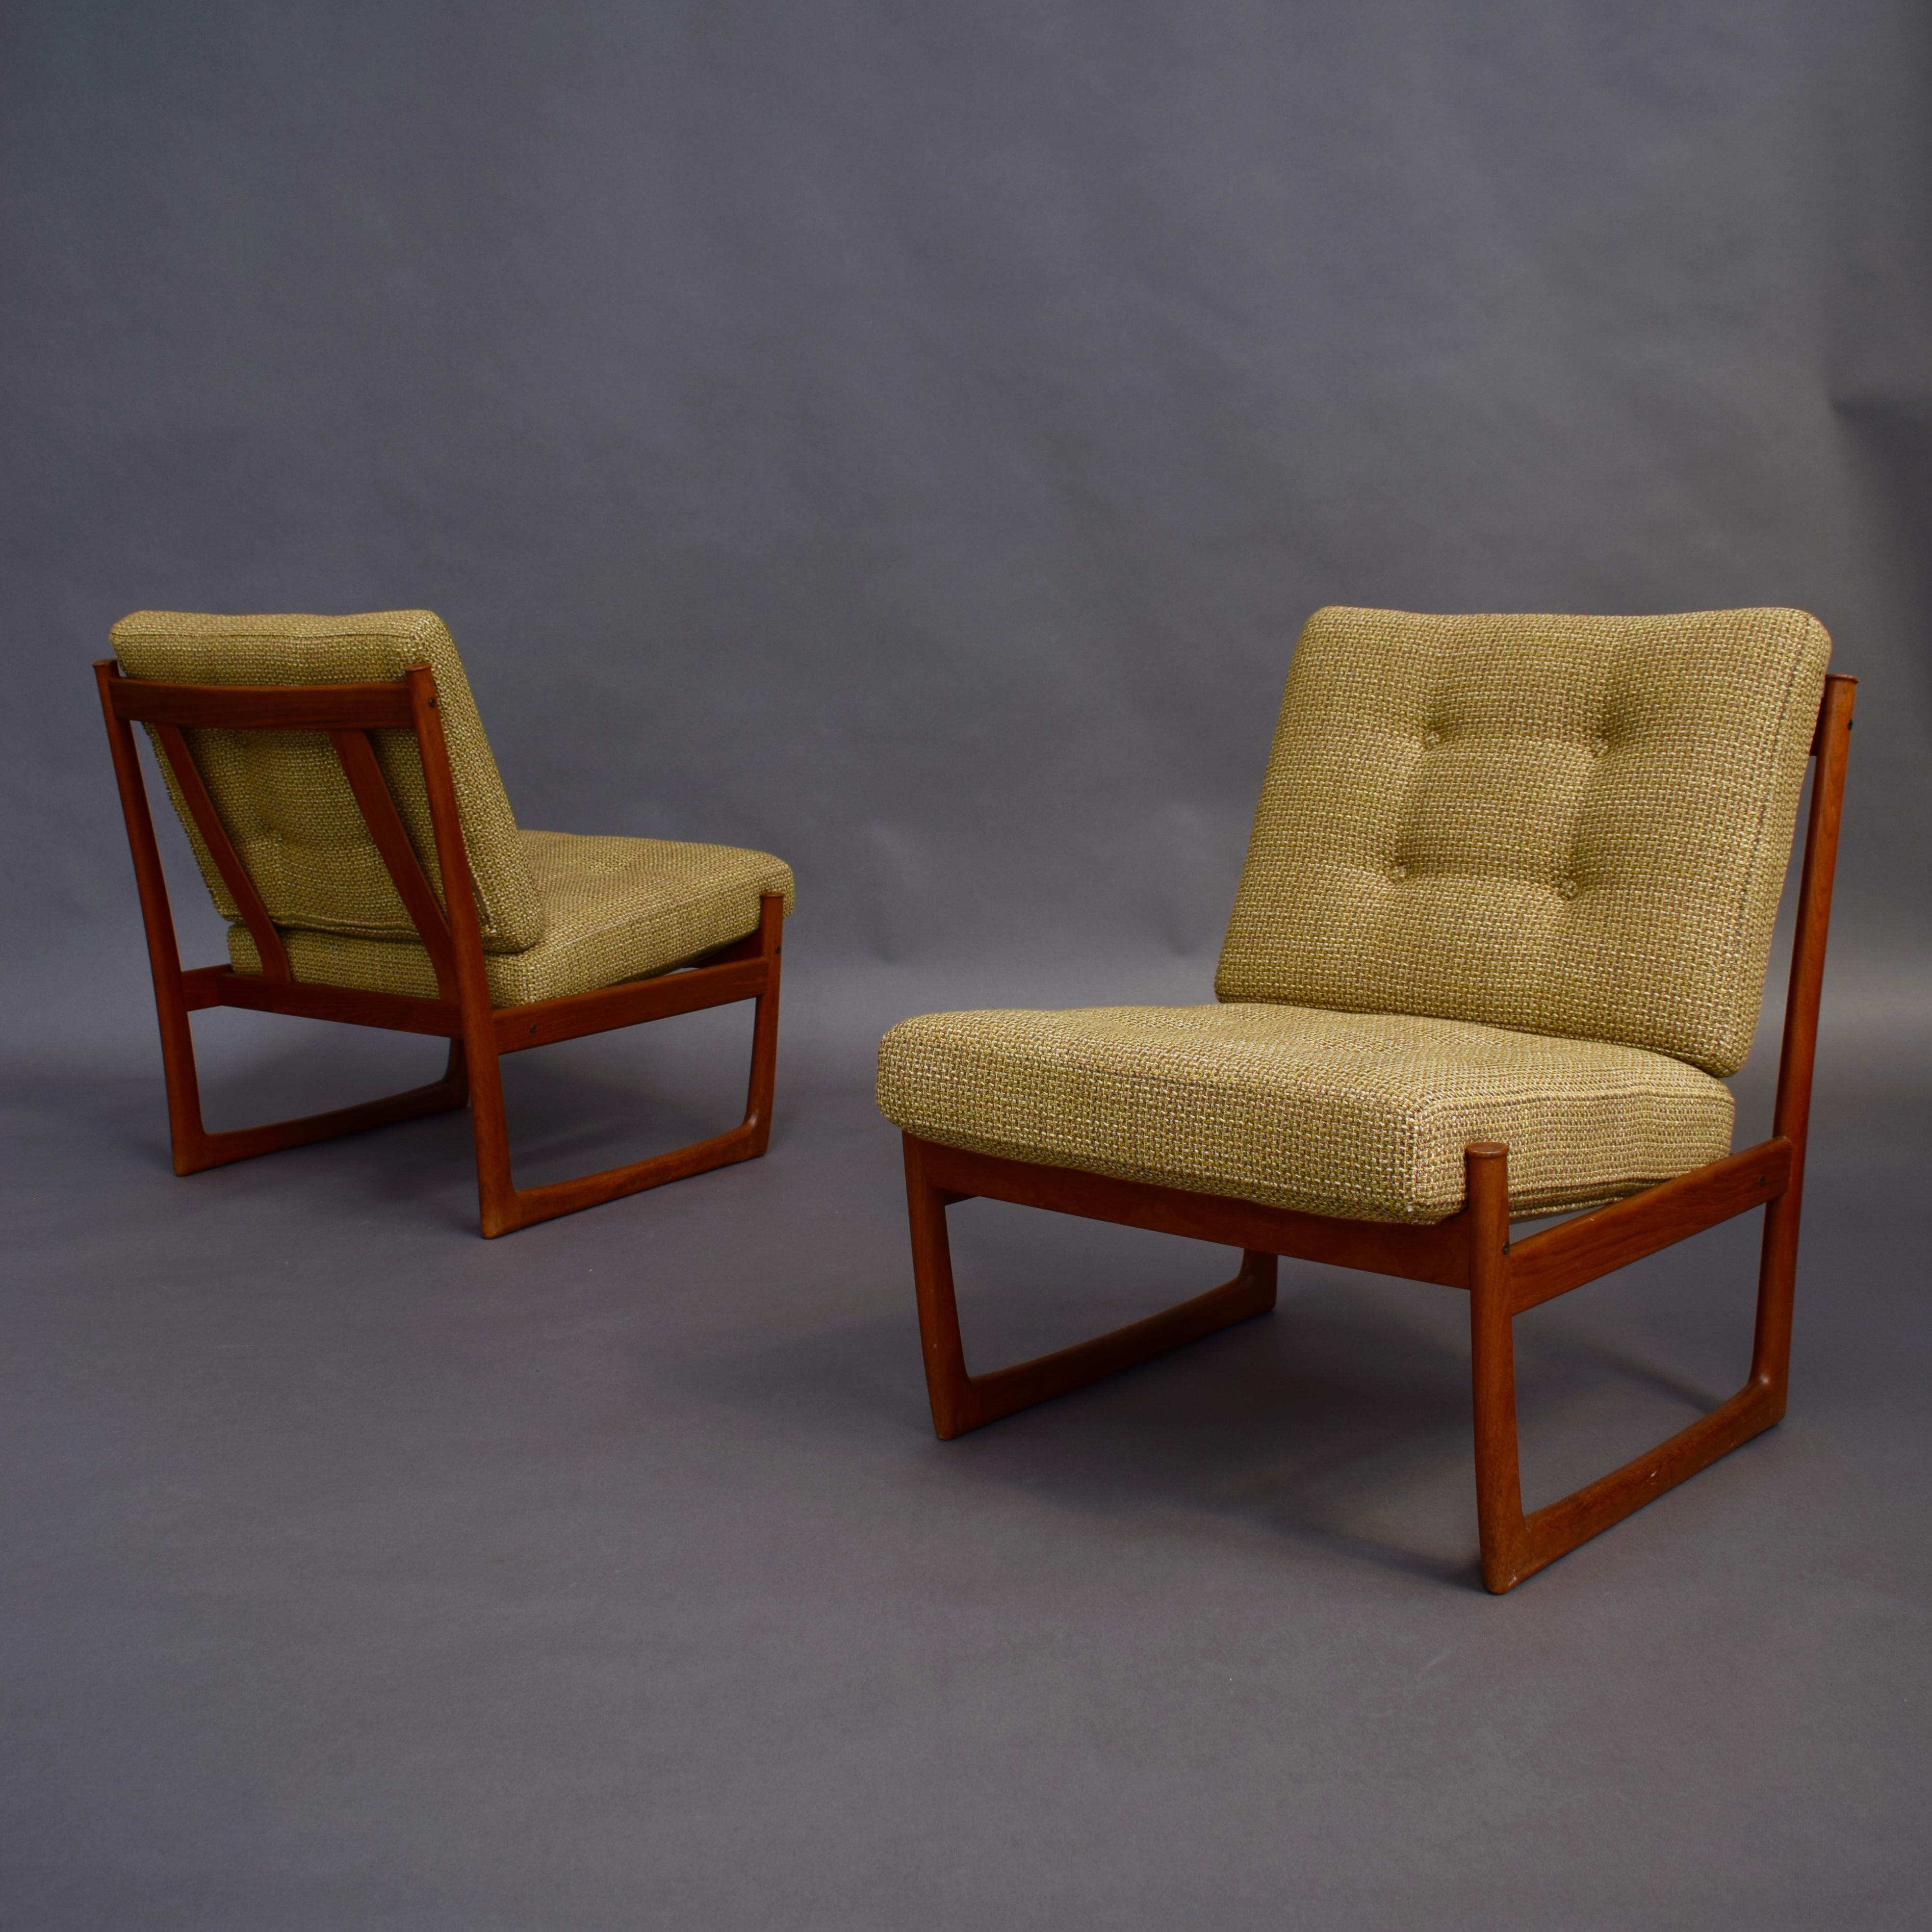 Gorgeous and sophisticated pair of lounge chairs model FD130 by Peter Hvidt / Orla Mølgaard-Nielsen for France and Son, Denmark, 1960s.
Rare to find without armrests. This makes them even more beautiful.
The cushions have been used for the new